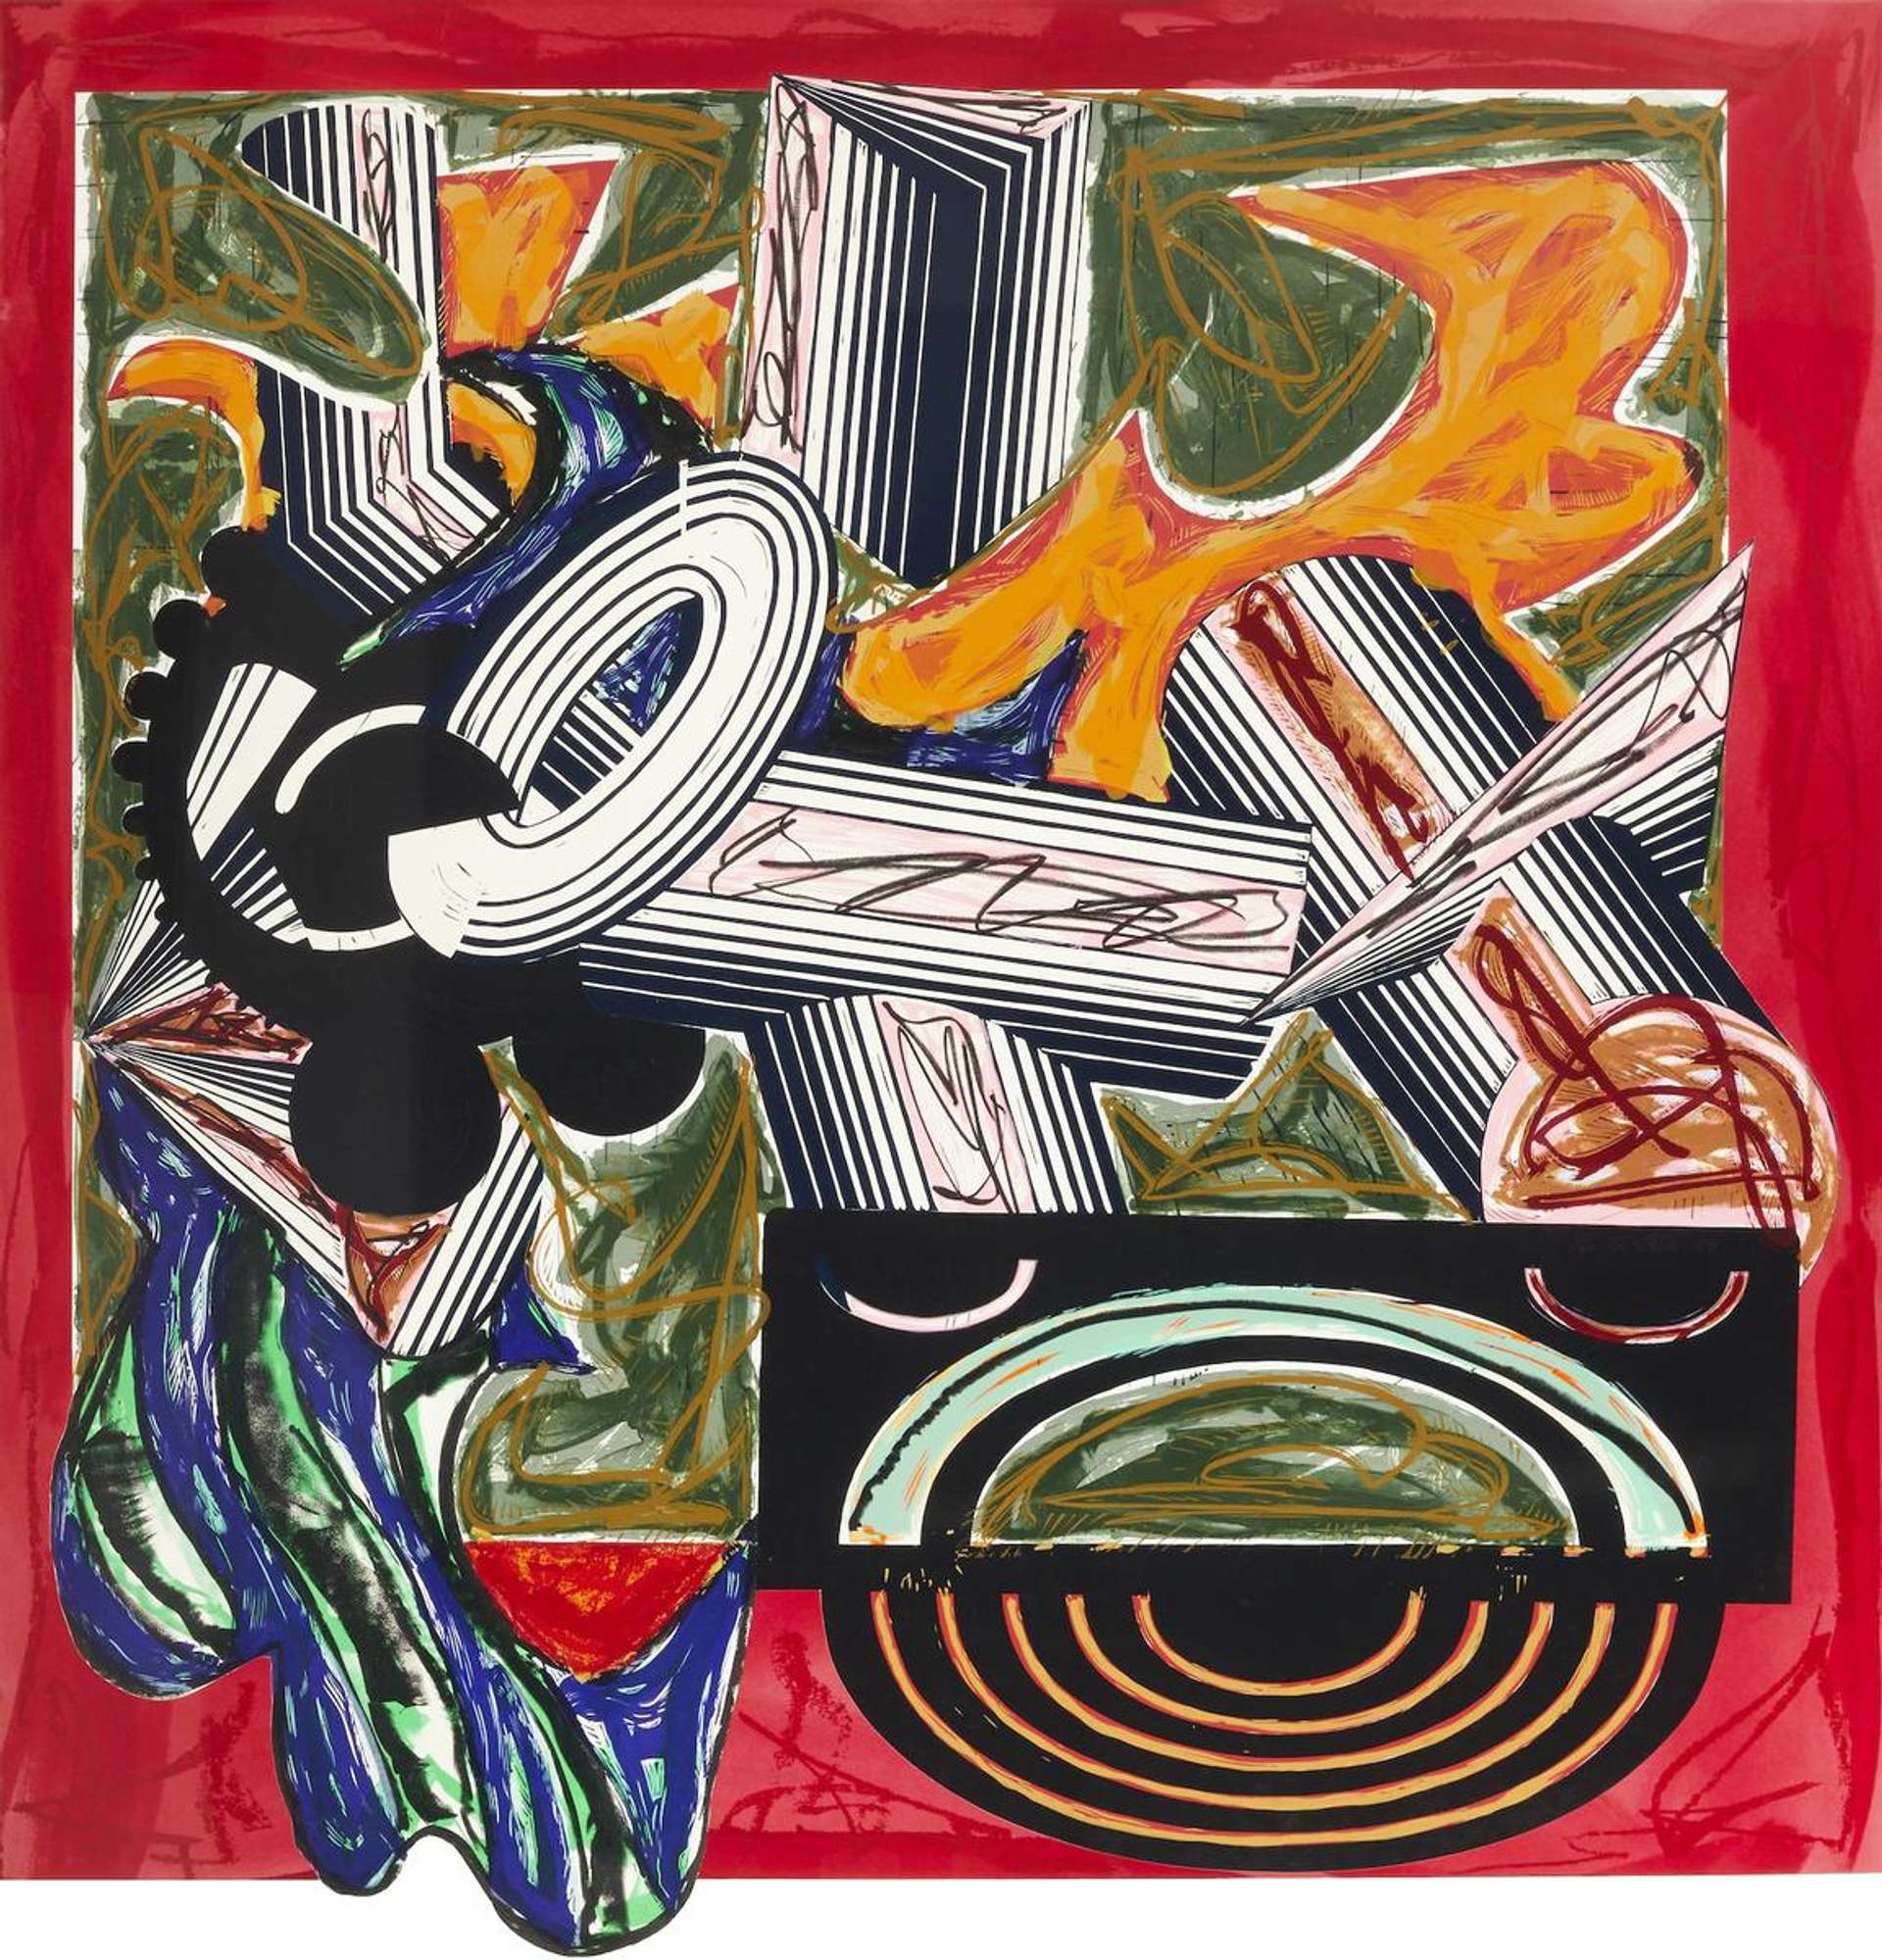 Then Came A Dog And Bit The Cat - Signed Print by Frank Stella 1984 - MyArtBroker